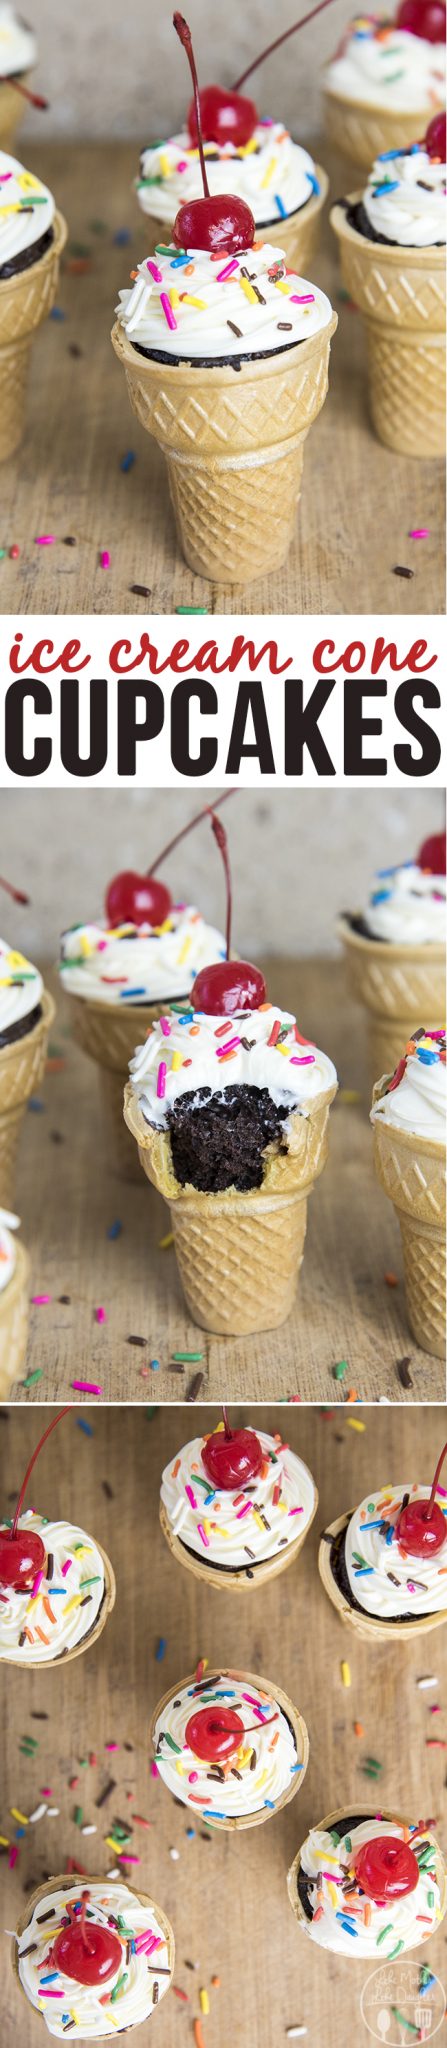 Front view of ice cream cone cupcakes with a cherry on top with a bite taken out.